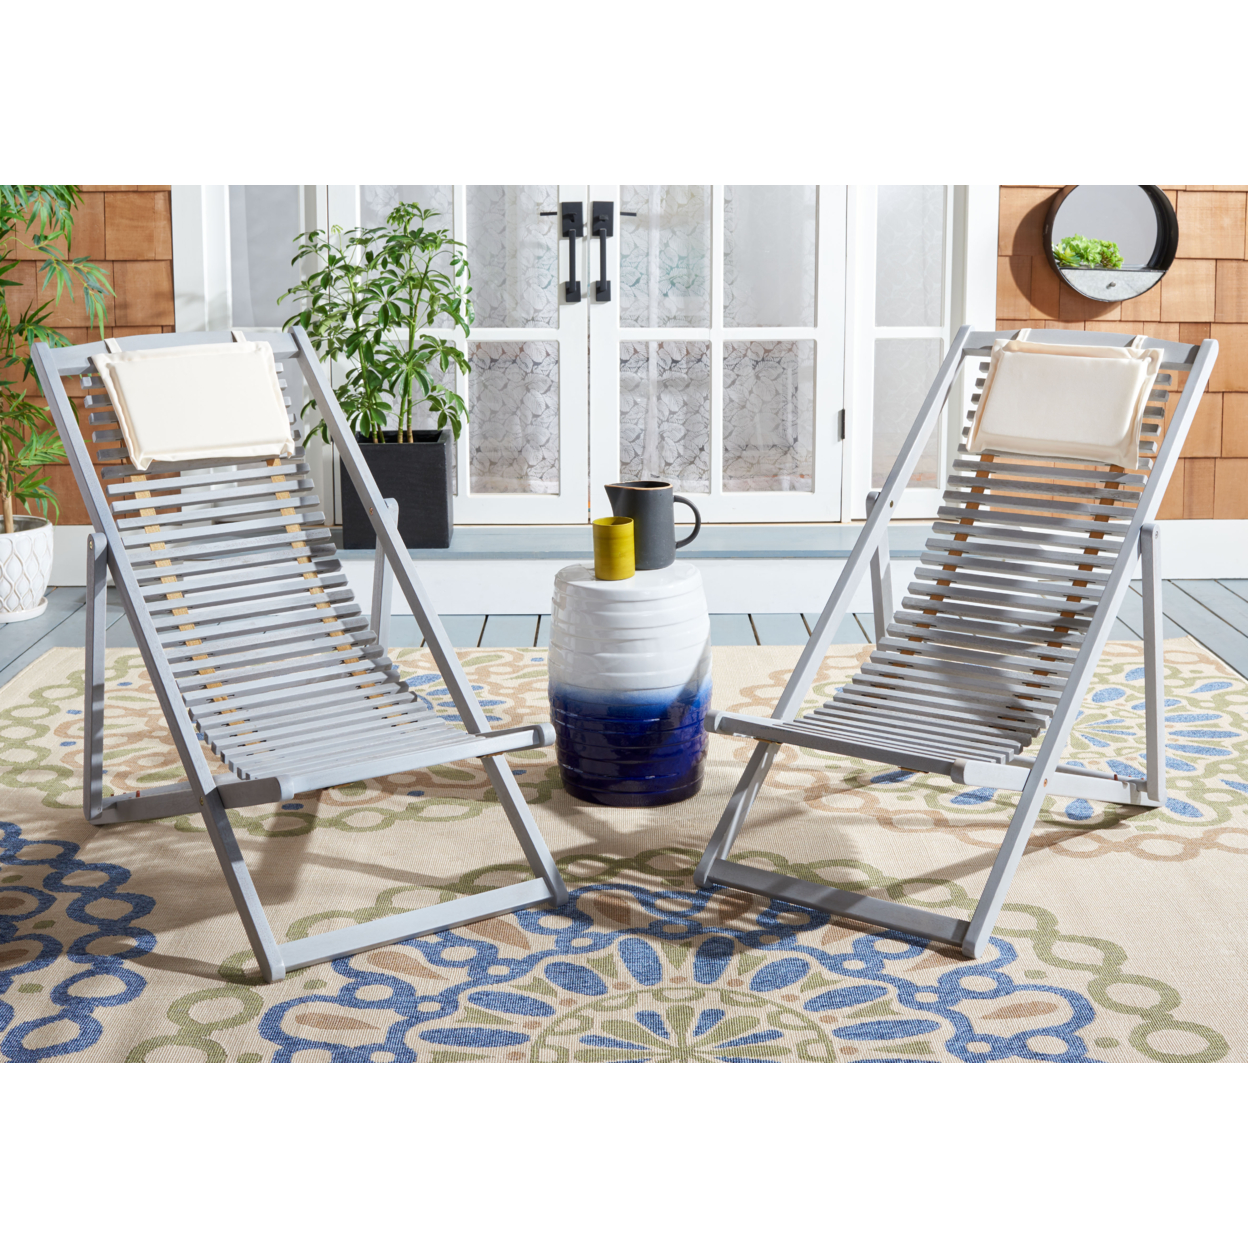 SAFAVIEH Outdoor Collection Rendi Relax Chair With Pillow Grey/Beige